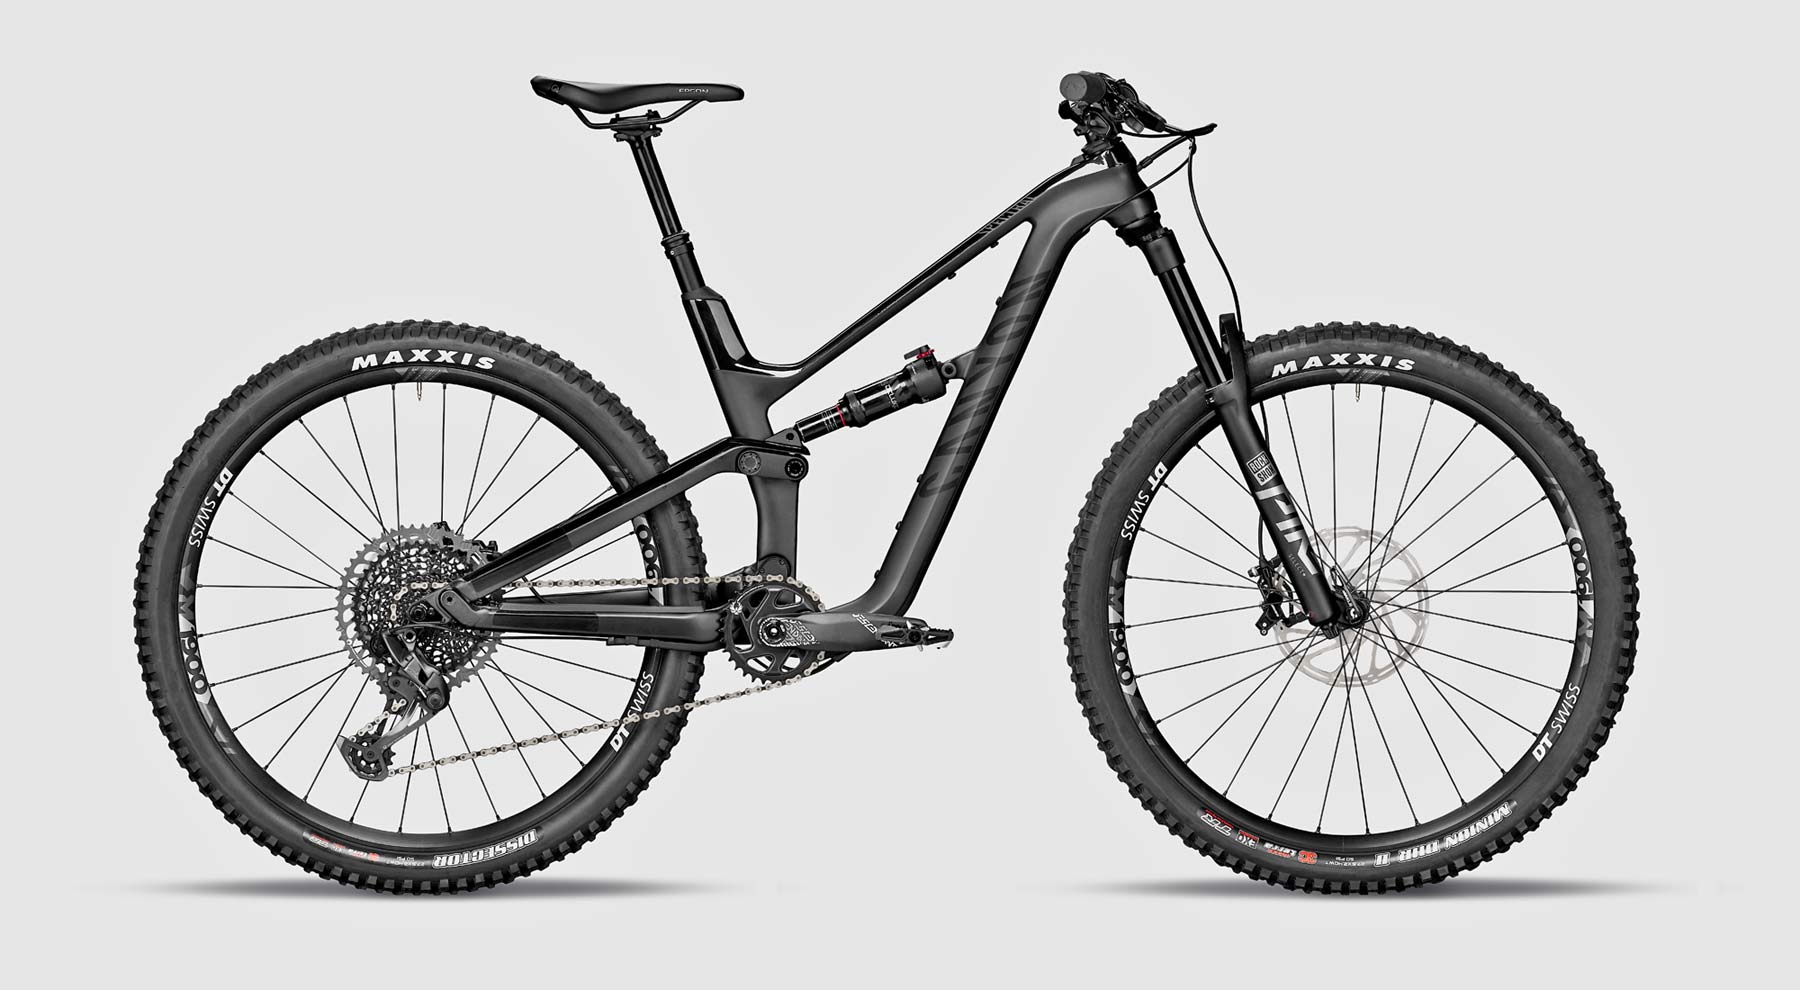 2021 Canyon Spectral trail bike, 27.5" 150mm all-mountain bike in carbon or alloy, CF 7 WMN